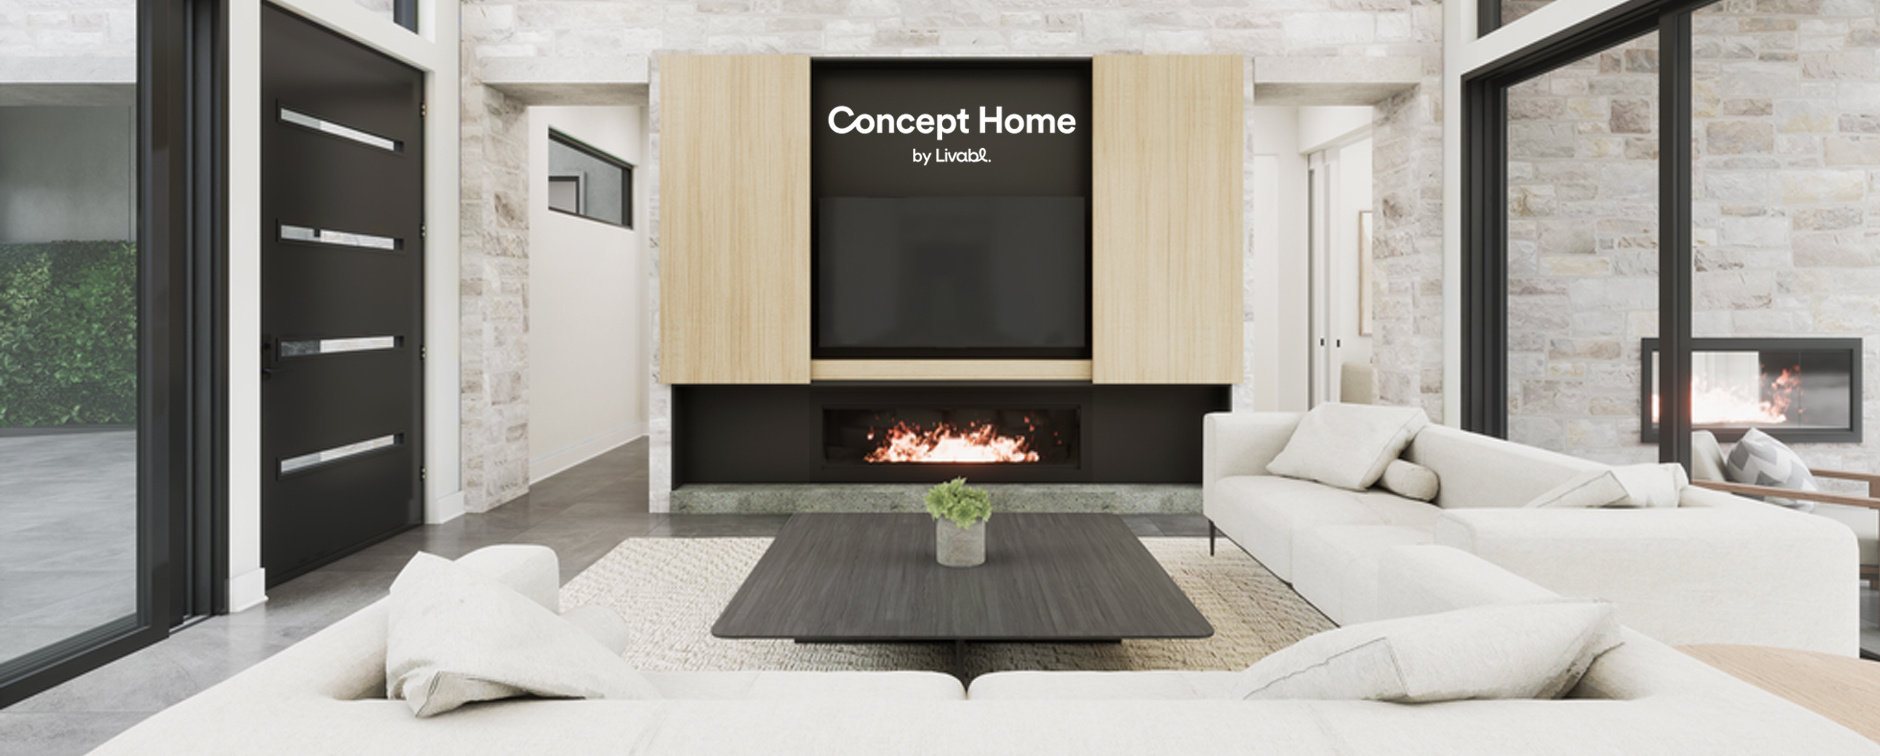 Virtual Concept Home by Livabl Living Room